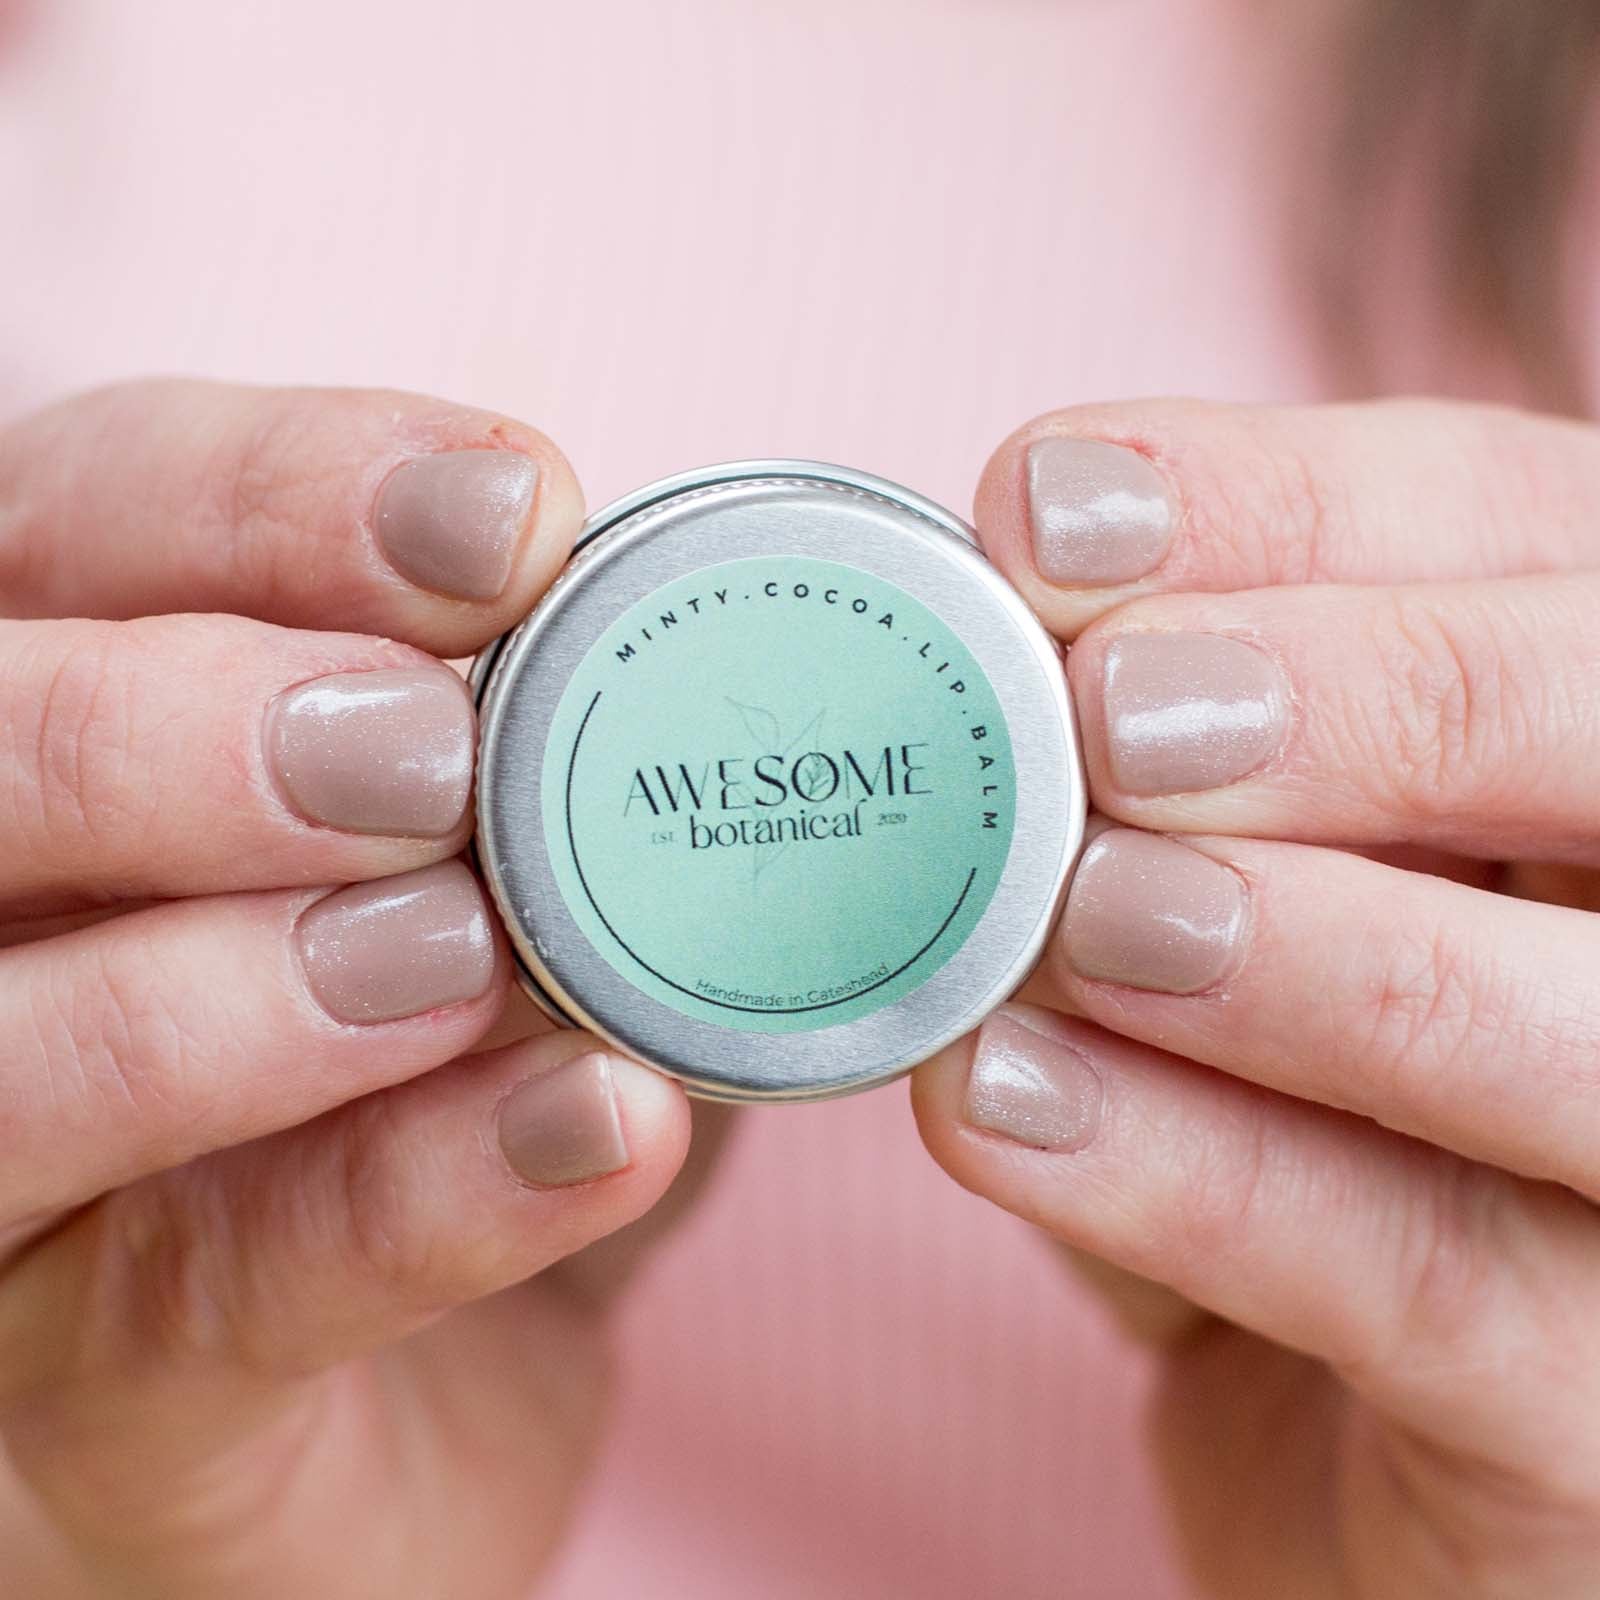 Minty Cocoa Lip Balm in hands